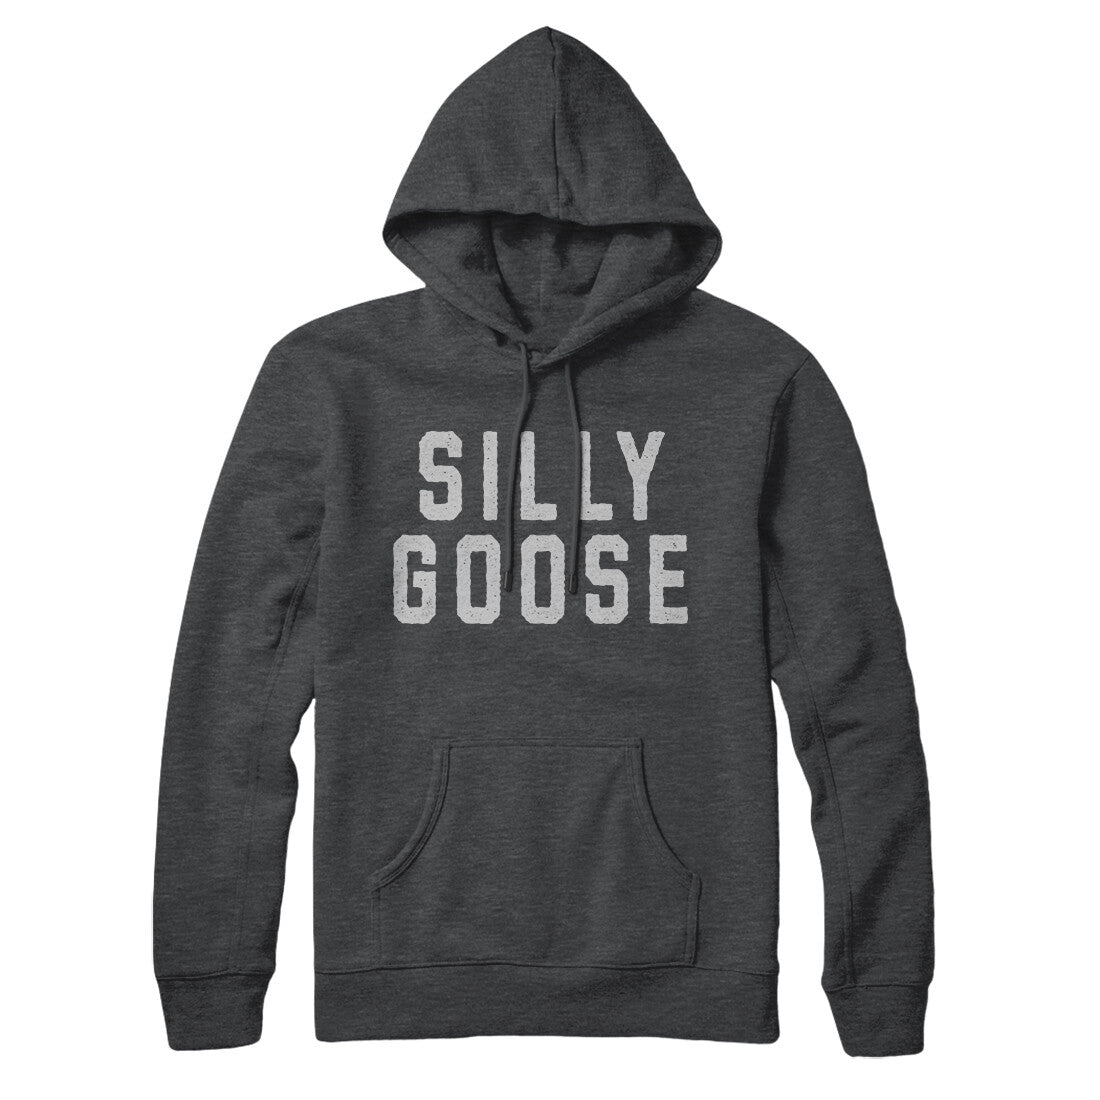 Silly Goose in Charcoal Heather Color